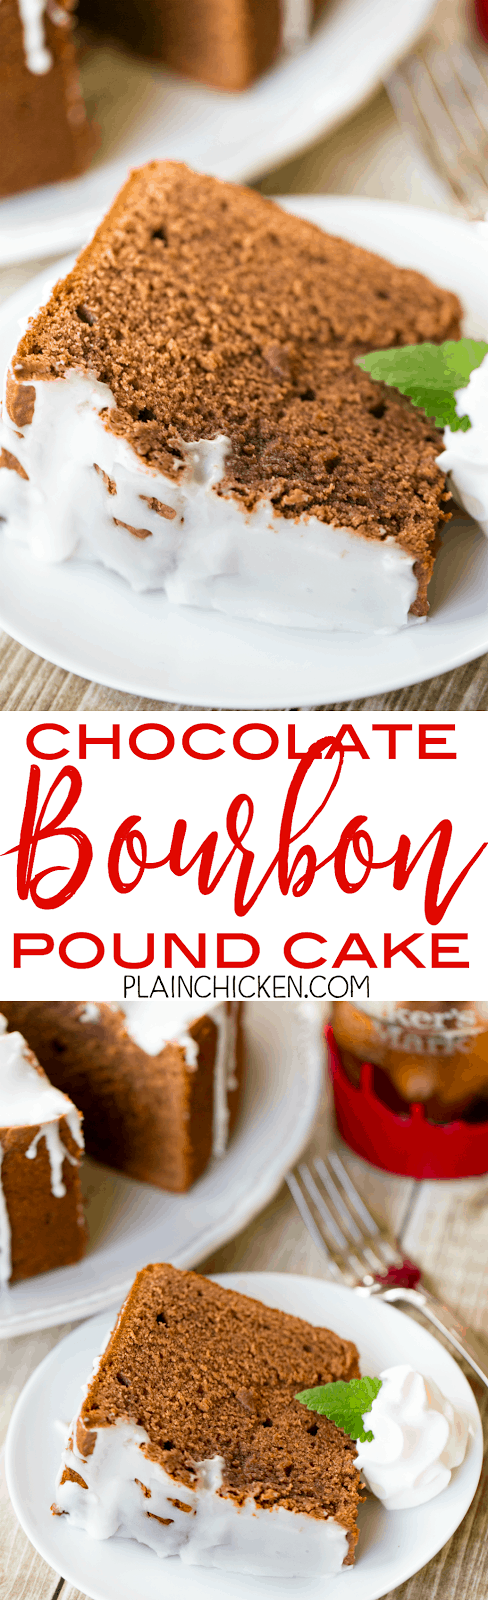 Chocolate Bourbon Pound Cake - crazy good! Easy home made chocolate pound cake spiked with bourbon. Flour, cocoa powder, chocolate pudding mix, baking soda, butter, sugar, eggs, sour cream and bourbon. Can make ahead of time and freeze for later. Perfect for potlucks, cookouts and watching the Kentucky Derby! Everyone loves this easy pound cake dessert recipe!